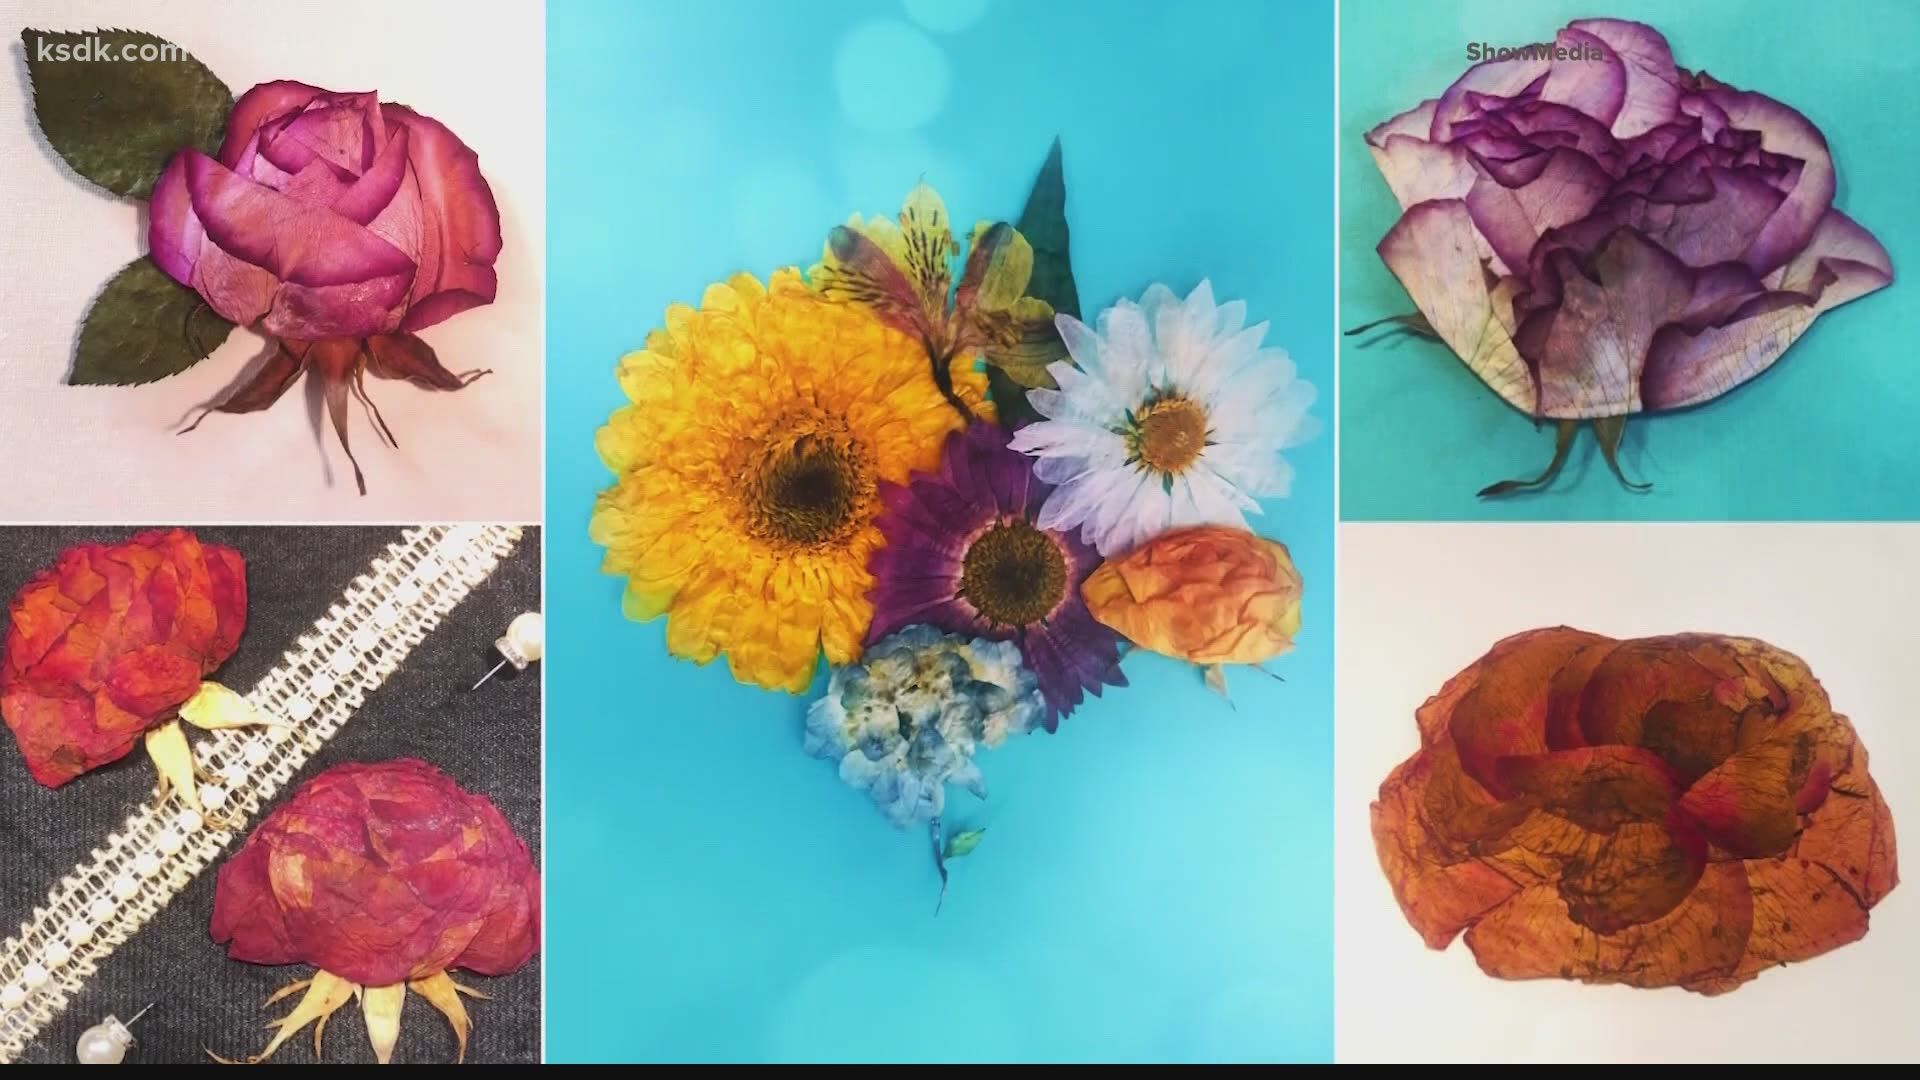 The Hazelwood resident created a product line to preserve fresh cut flowers and bring dried flowers back to life. The company is called The Floral Preservation Co.